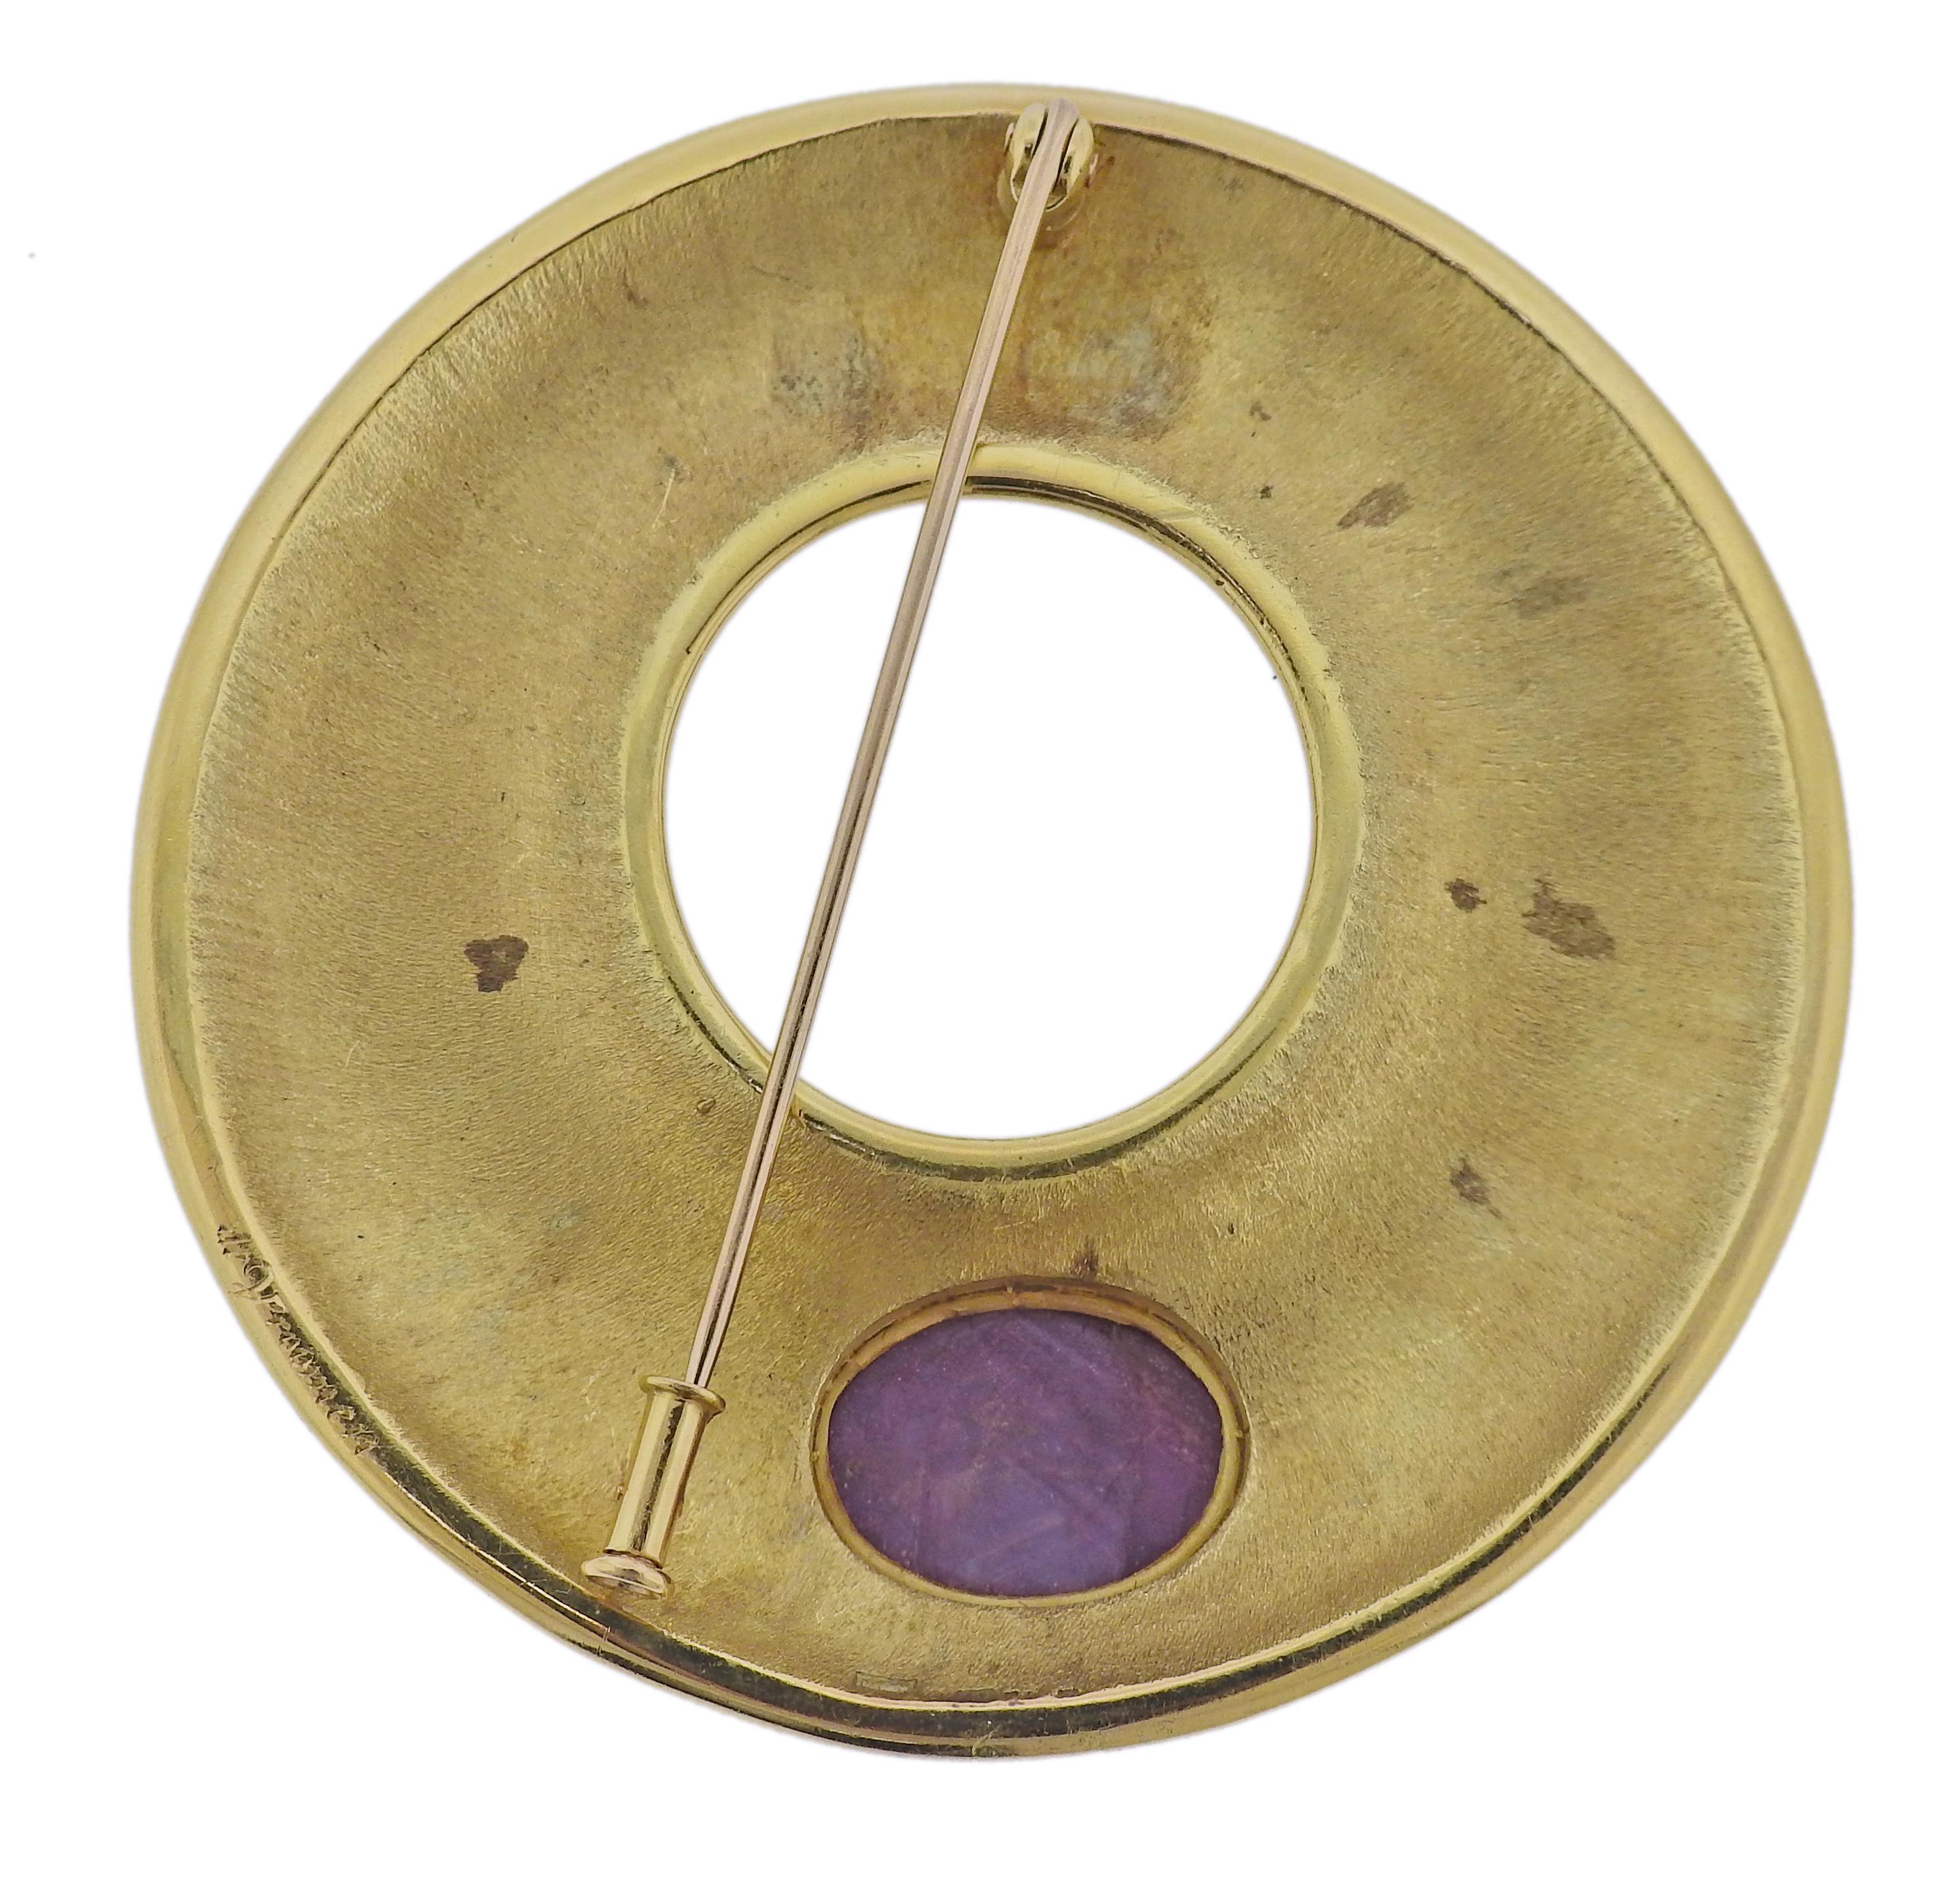 Large 18k gold brooch by Leo de Vroomen, decorated with enamel and 14.8mm x 11.2mm ruby cabochon. Brooch is 58mm in diameter. Marked: LDV English marks. Weight - 51.8 grams.